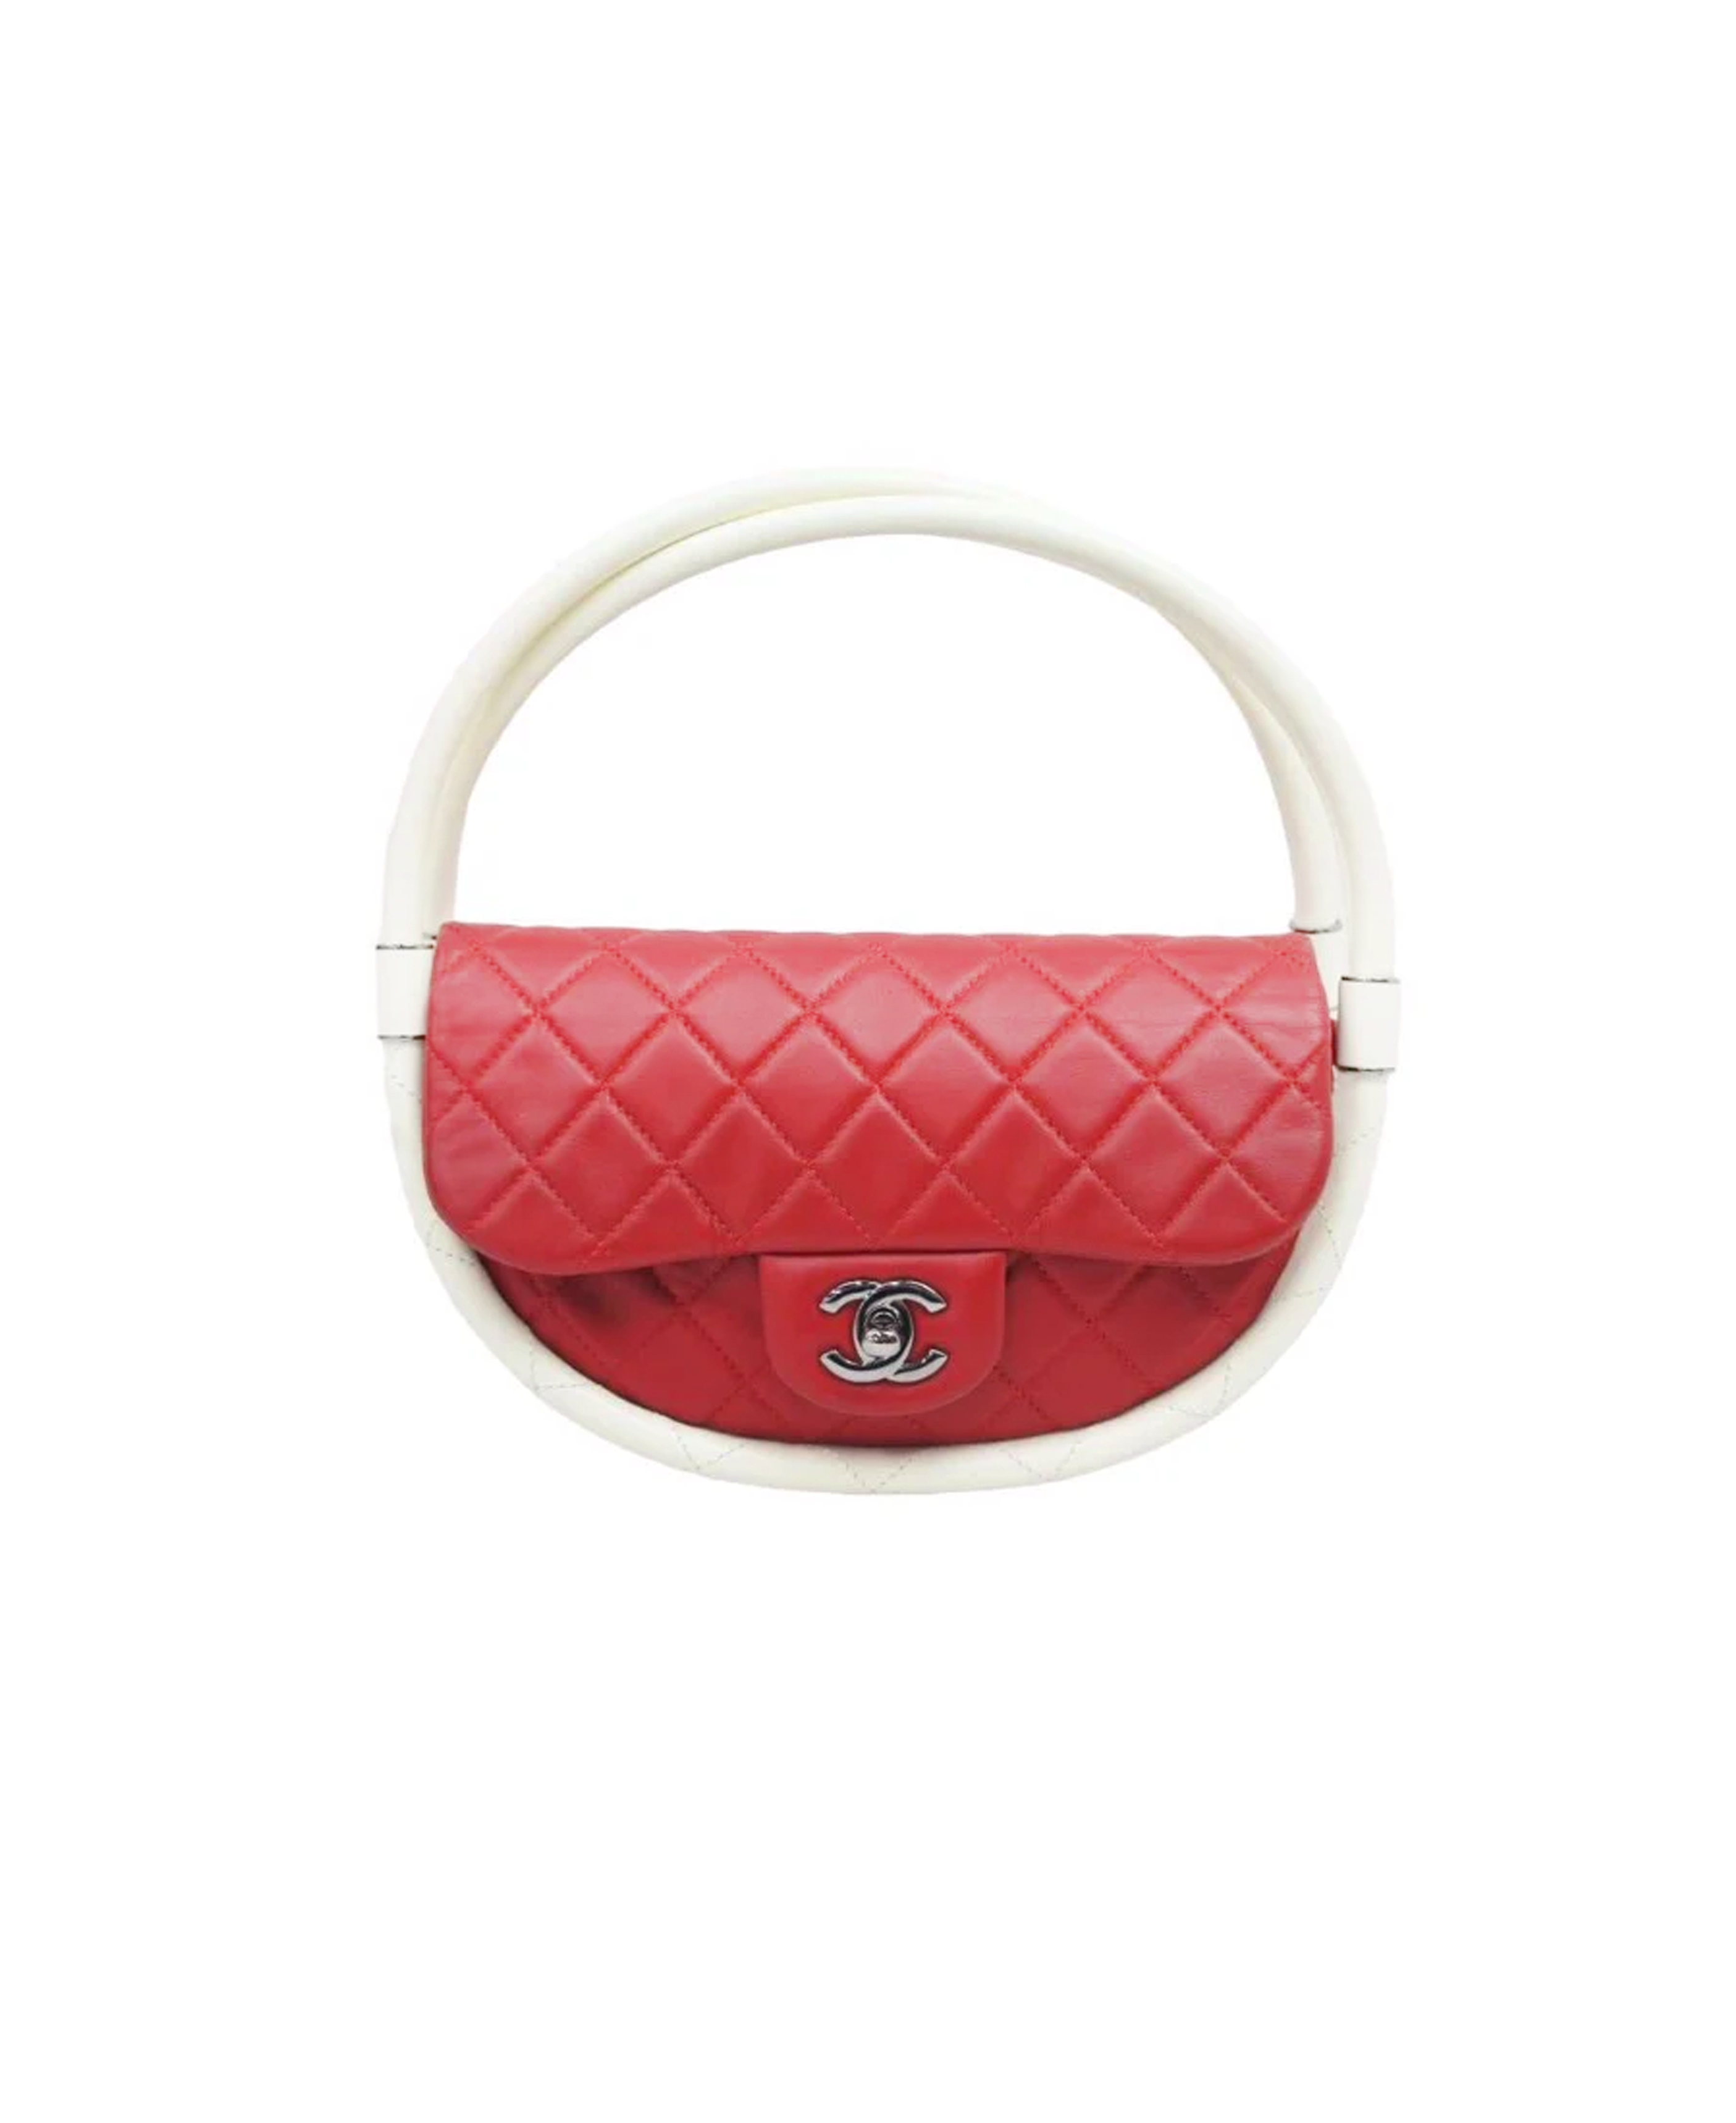 Chanel 2013 Runway Red and White Hula Bag · INTO